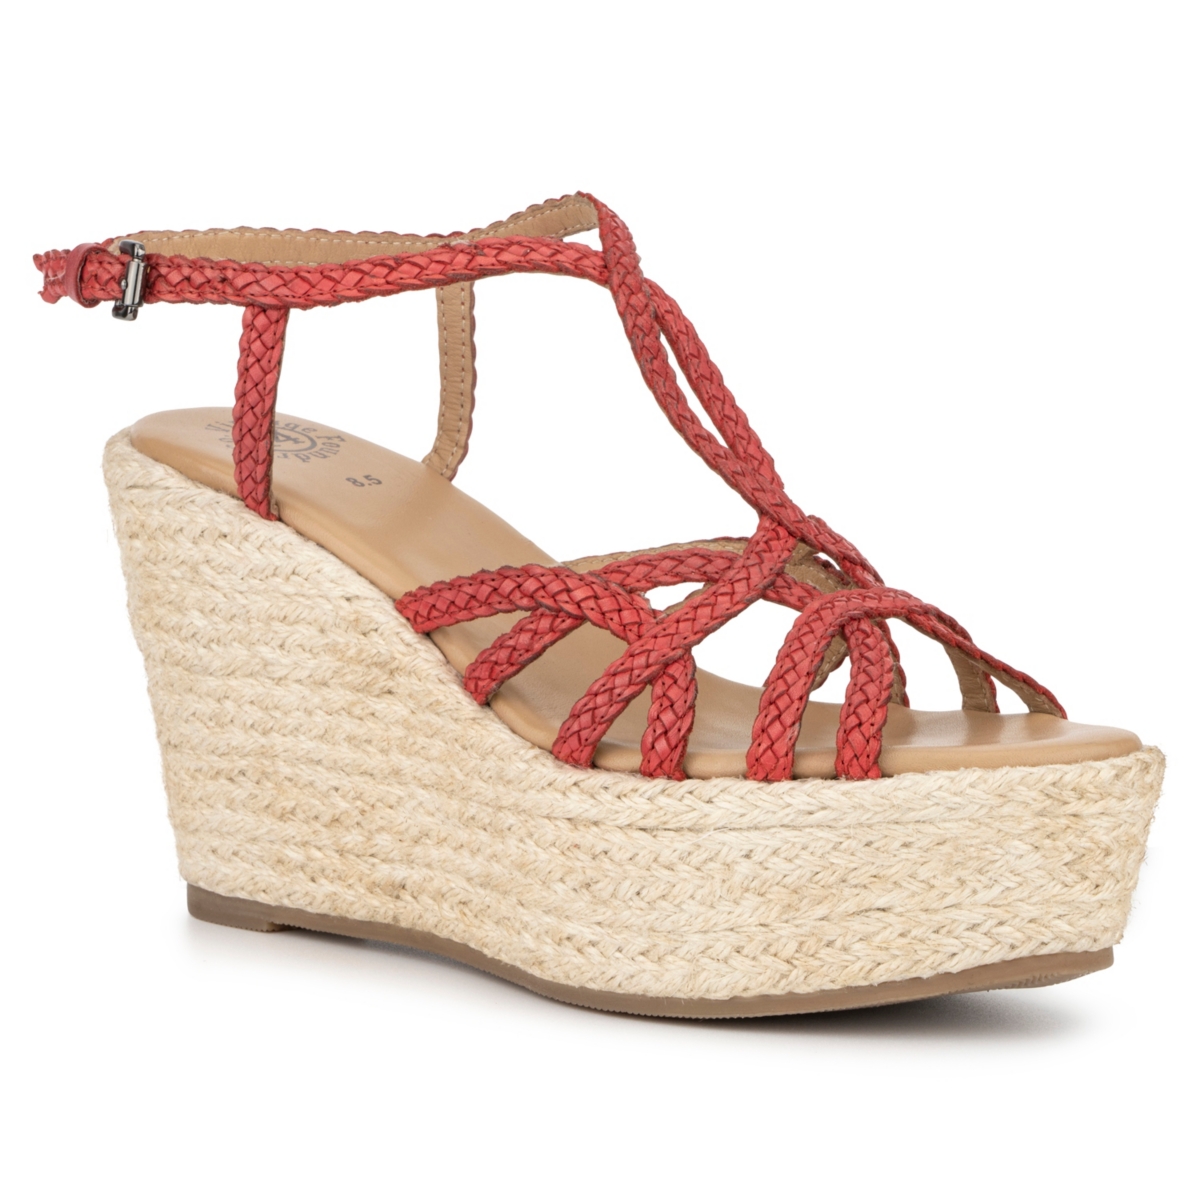 Vintage Foundry Co Women's Eloise Wedge Sandal - Red